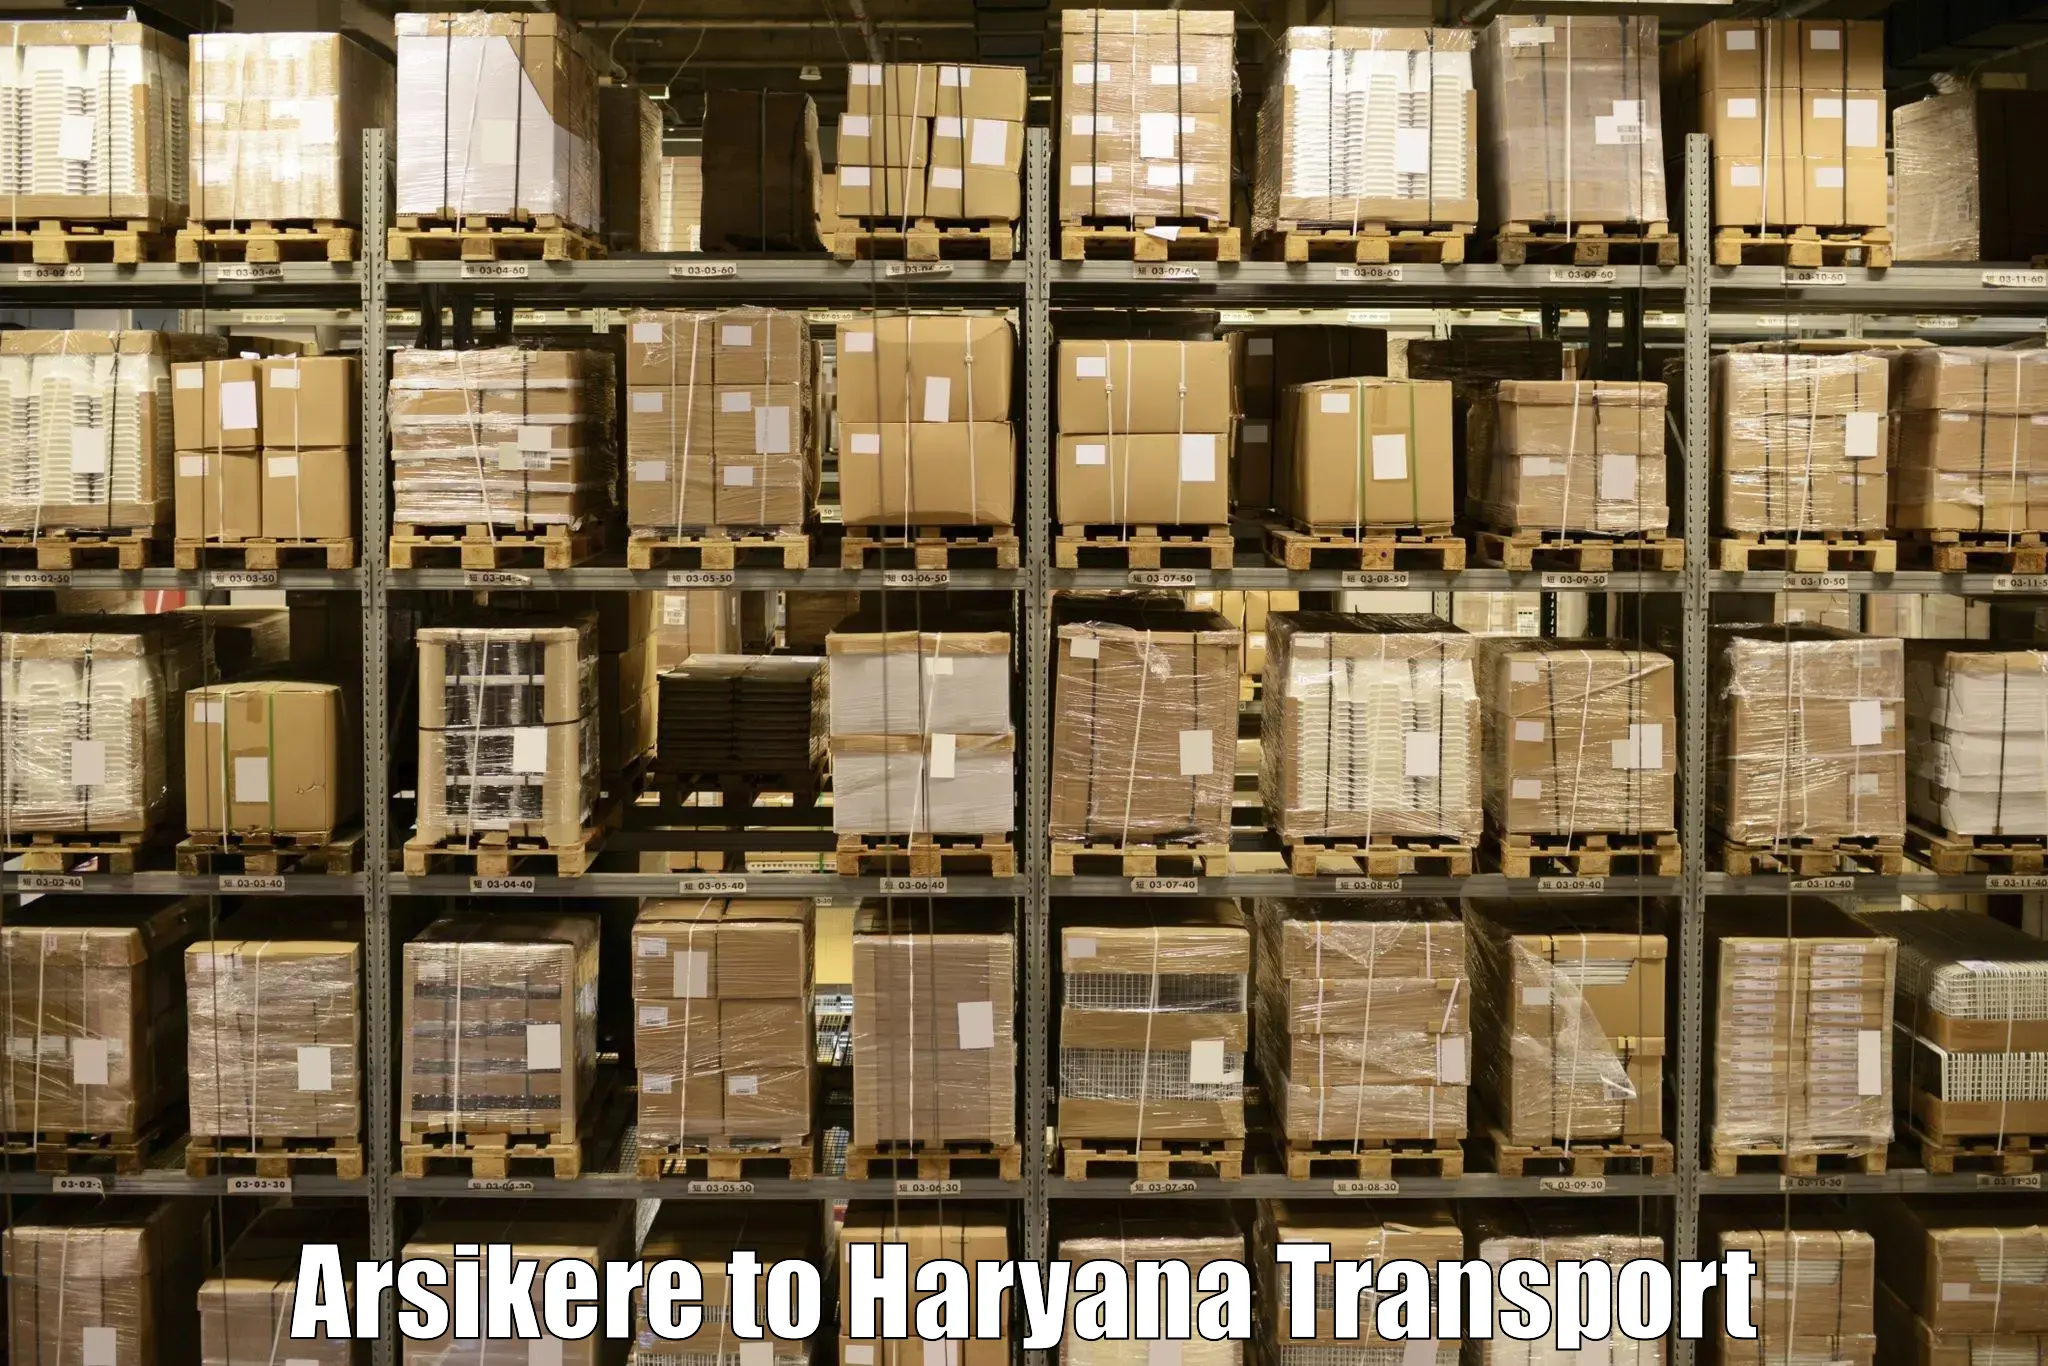 Online transport booking Arsikere to Chaudhary Charan Singh Haryana Agricultural University Hisar